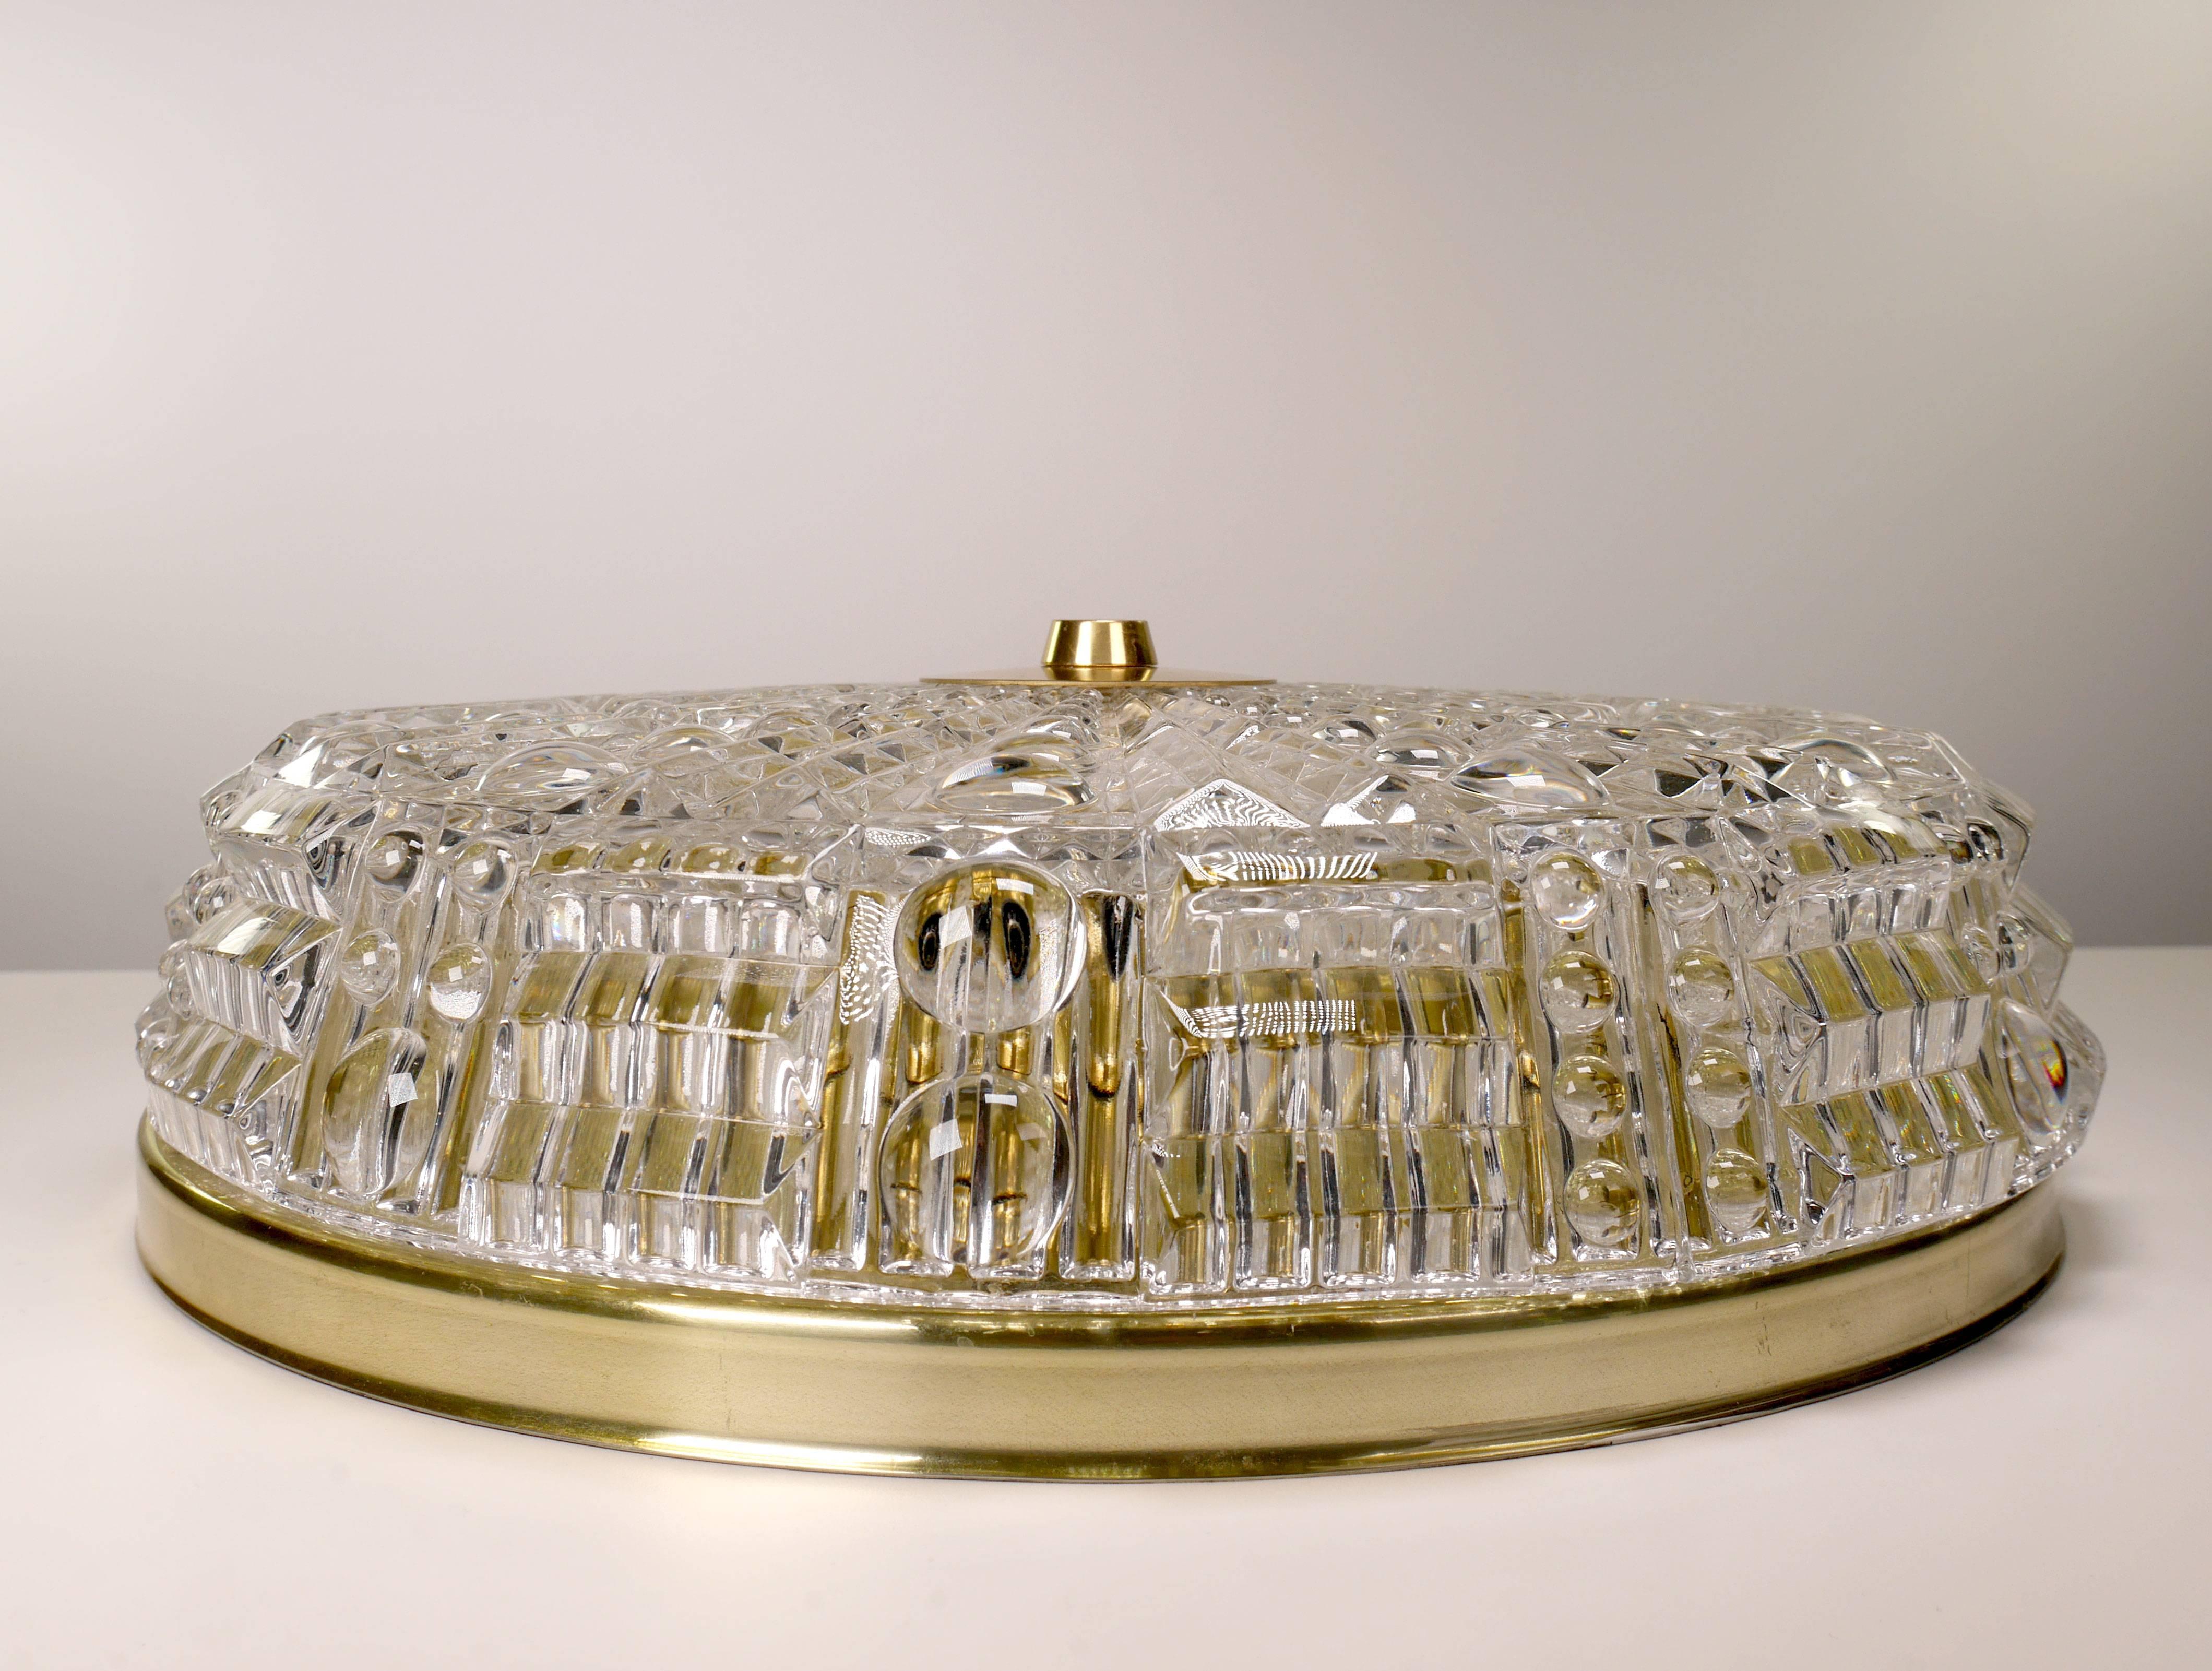 An absolute classic within Swedish Mid-century Modern glasswork! Swedish Mid-Century Modern one-piece textured crystal flush mount. Modernist design by Carl Fagerlund in the late 1950s-early 1960s for Swedish Orrefors Glasbruk. Brass mount and